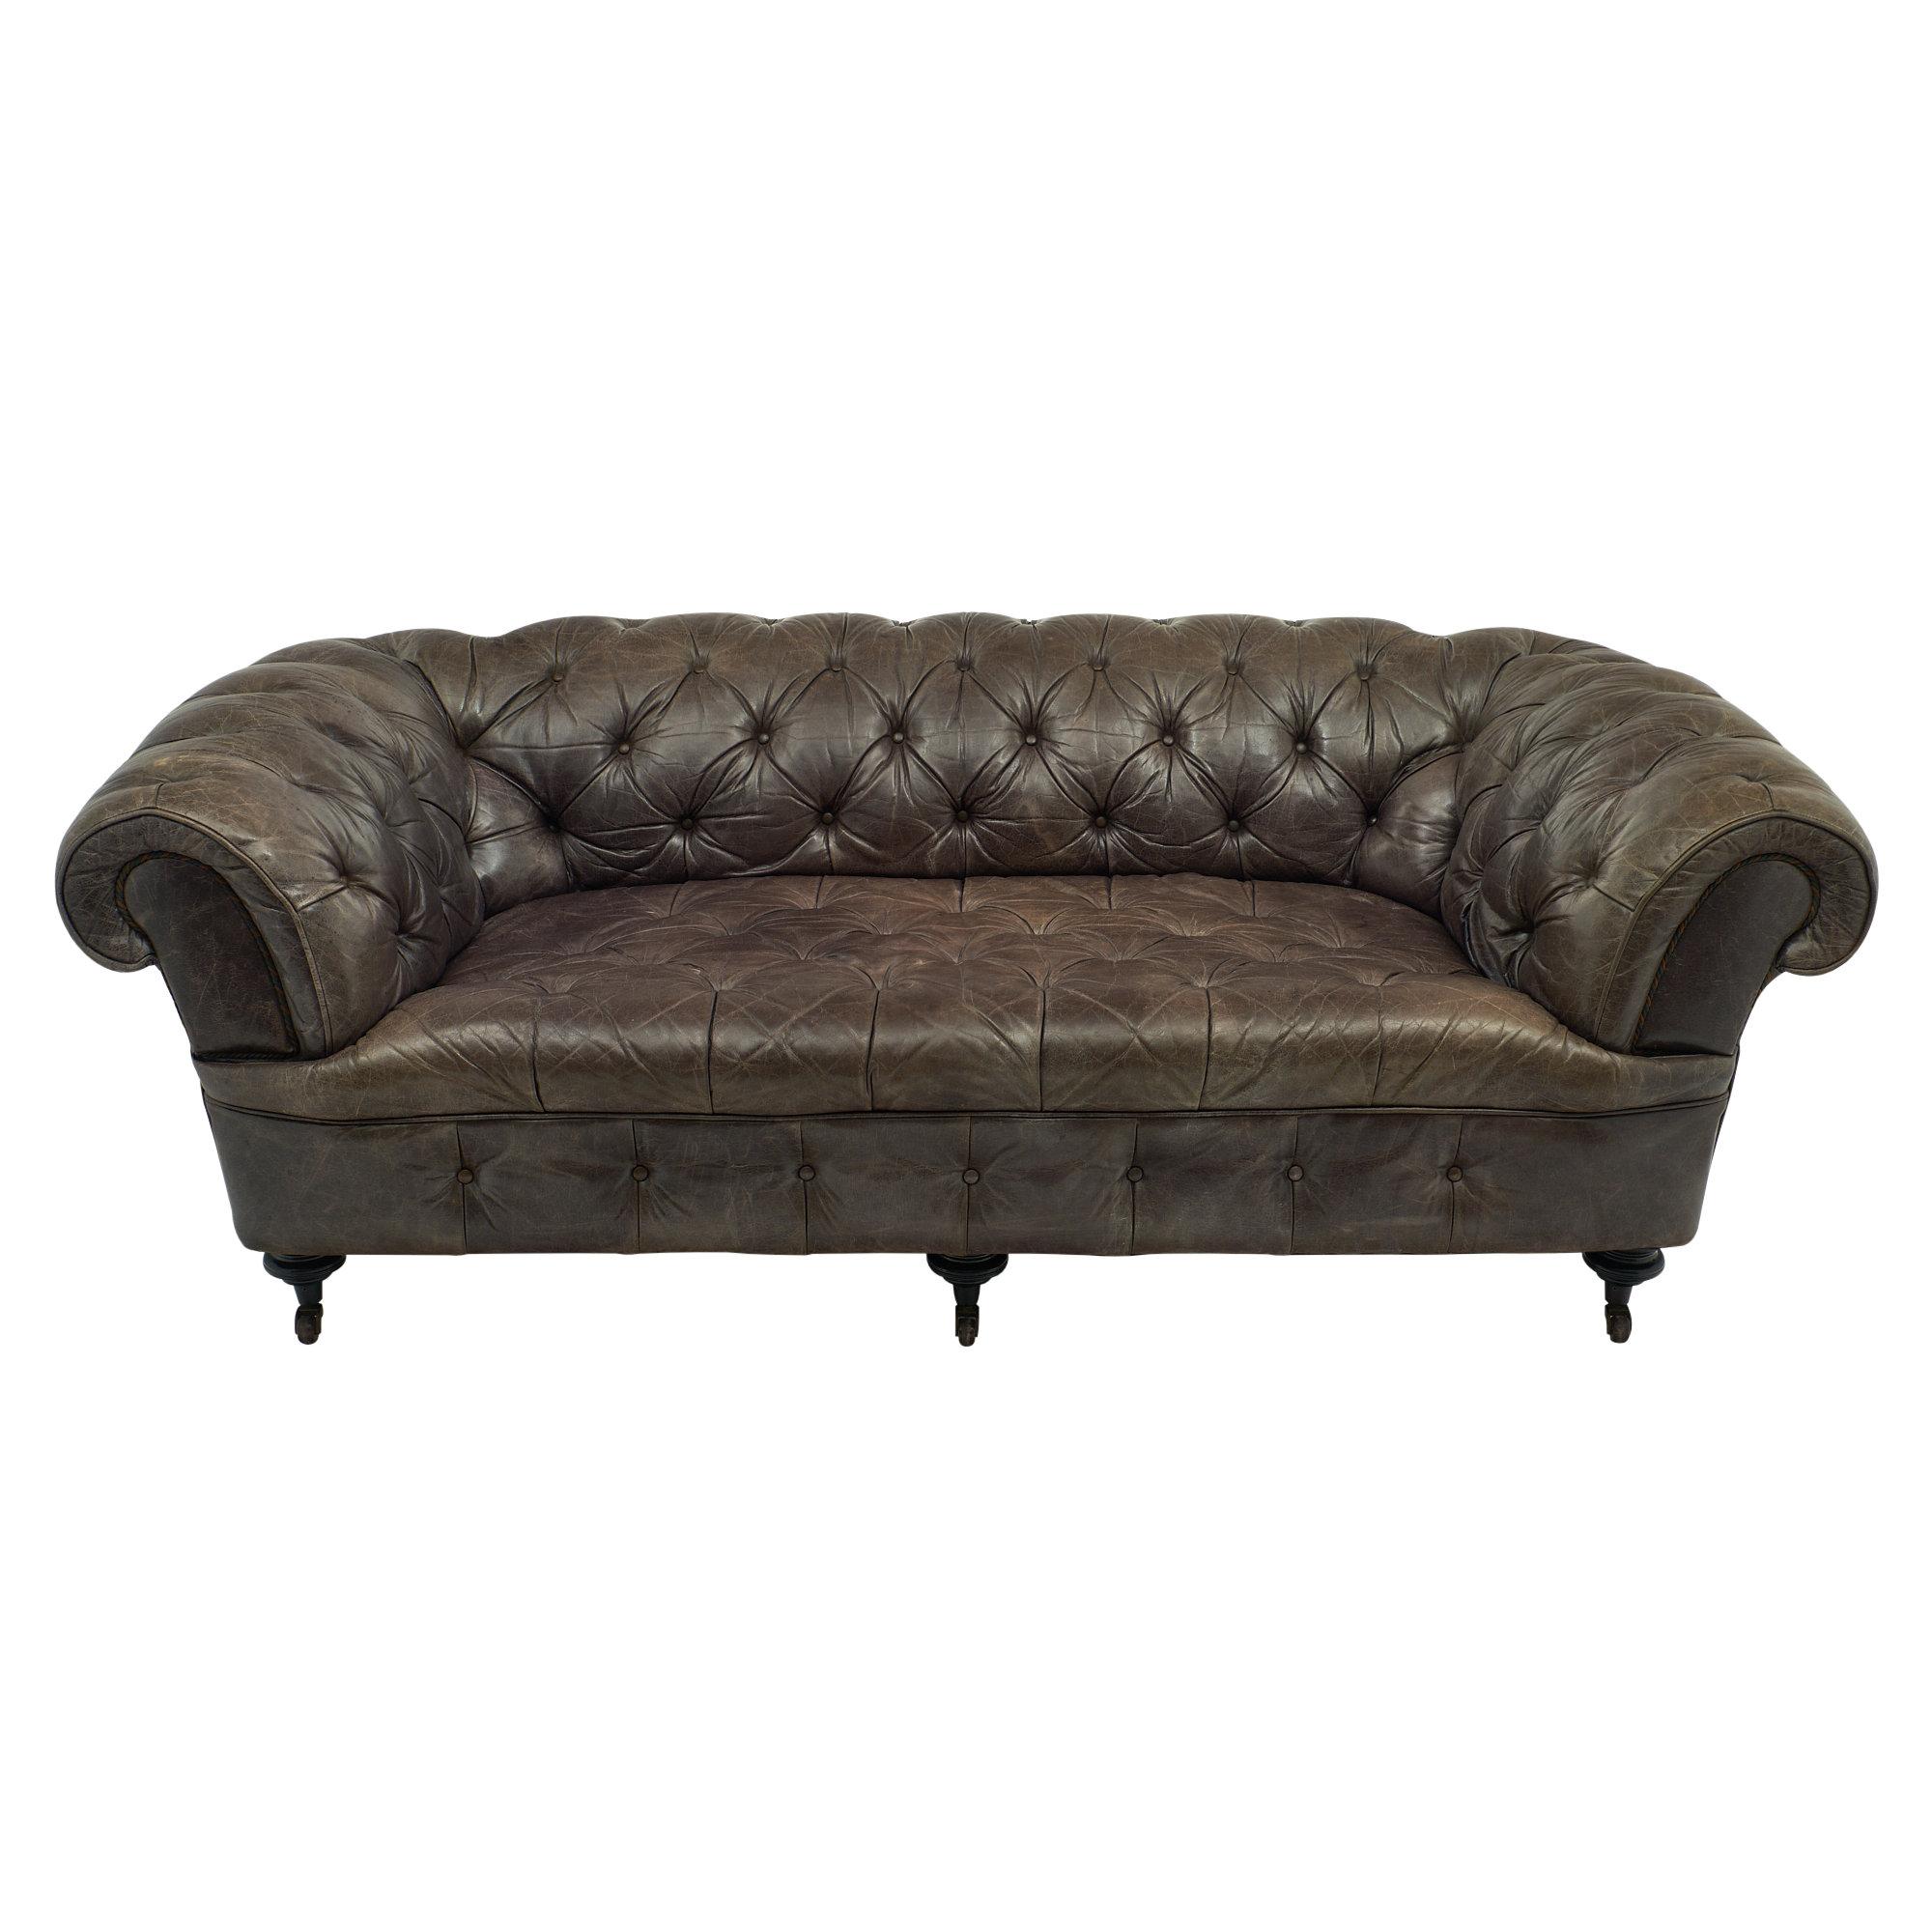 Gray Leather Vintage Chesterfield Sofa